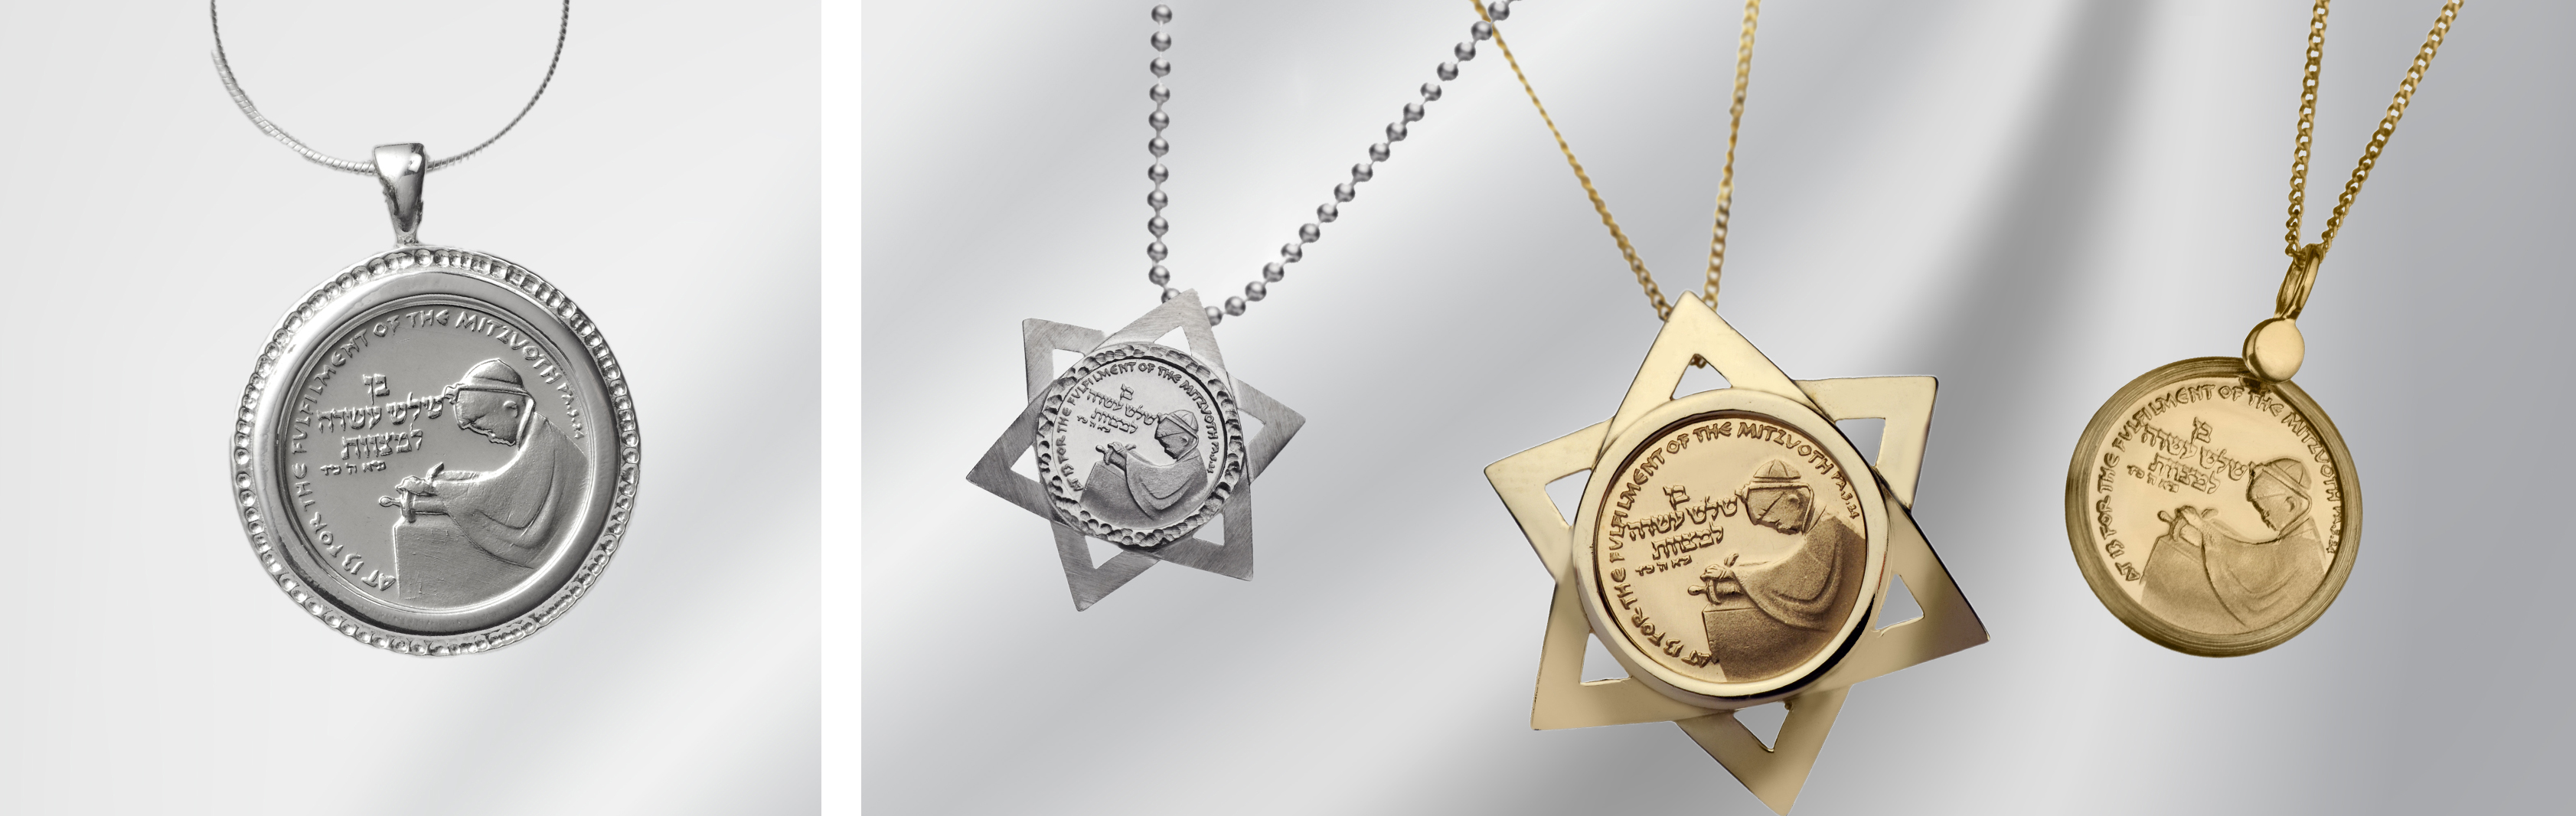 Bar Mitzvah Adillion | Official Medal set in 14K Gold and Silver Jewelry